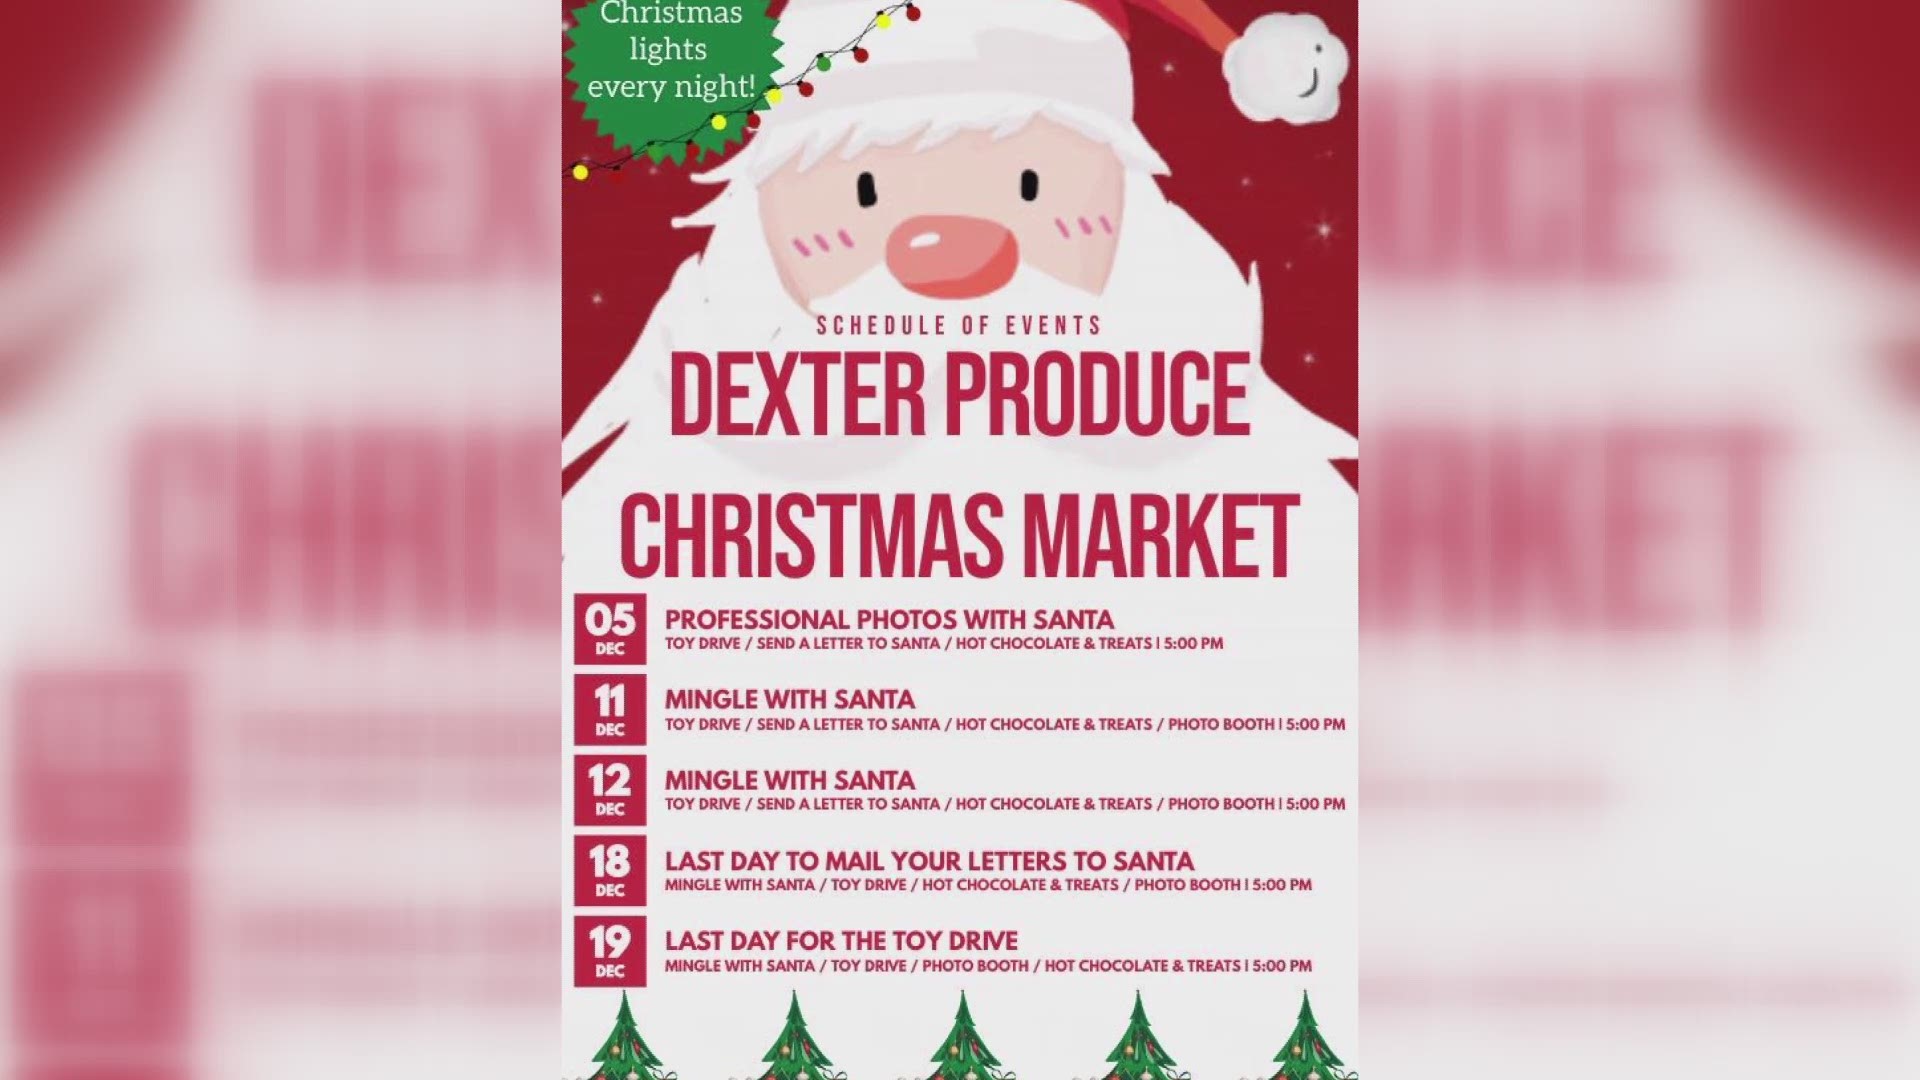 The owner of Dexter Produce hopes market visitors will bring a toy to help them spread that Christmas cheer to those in need